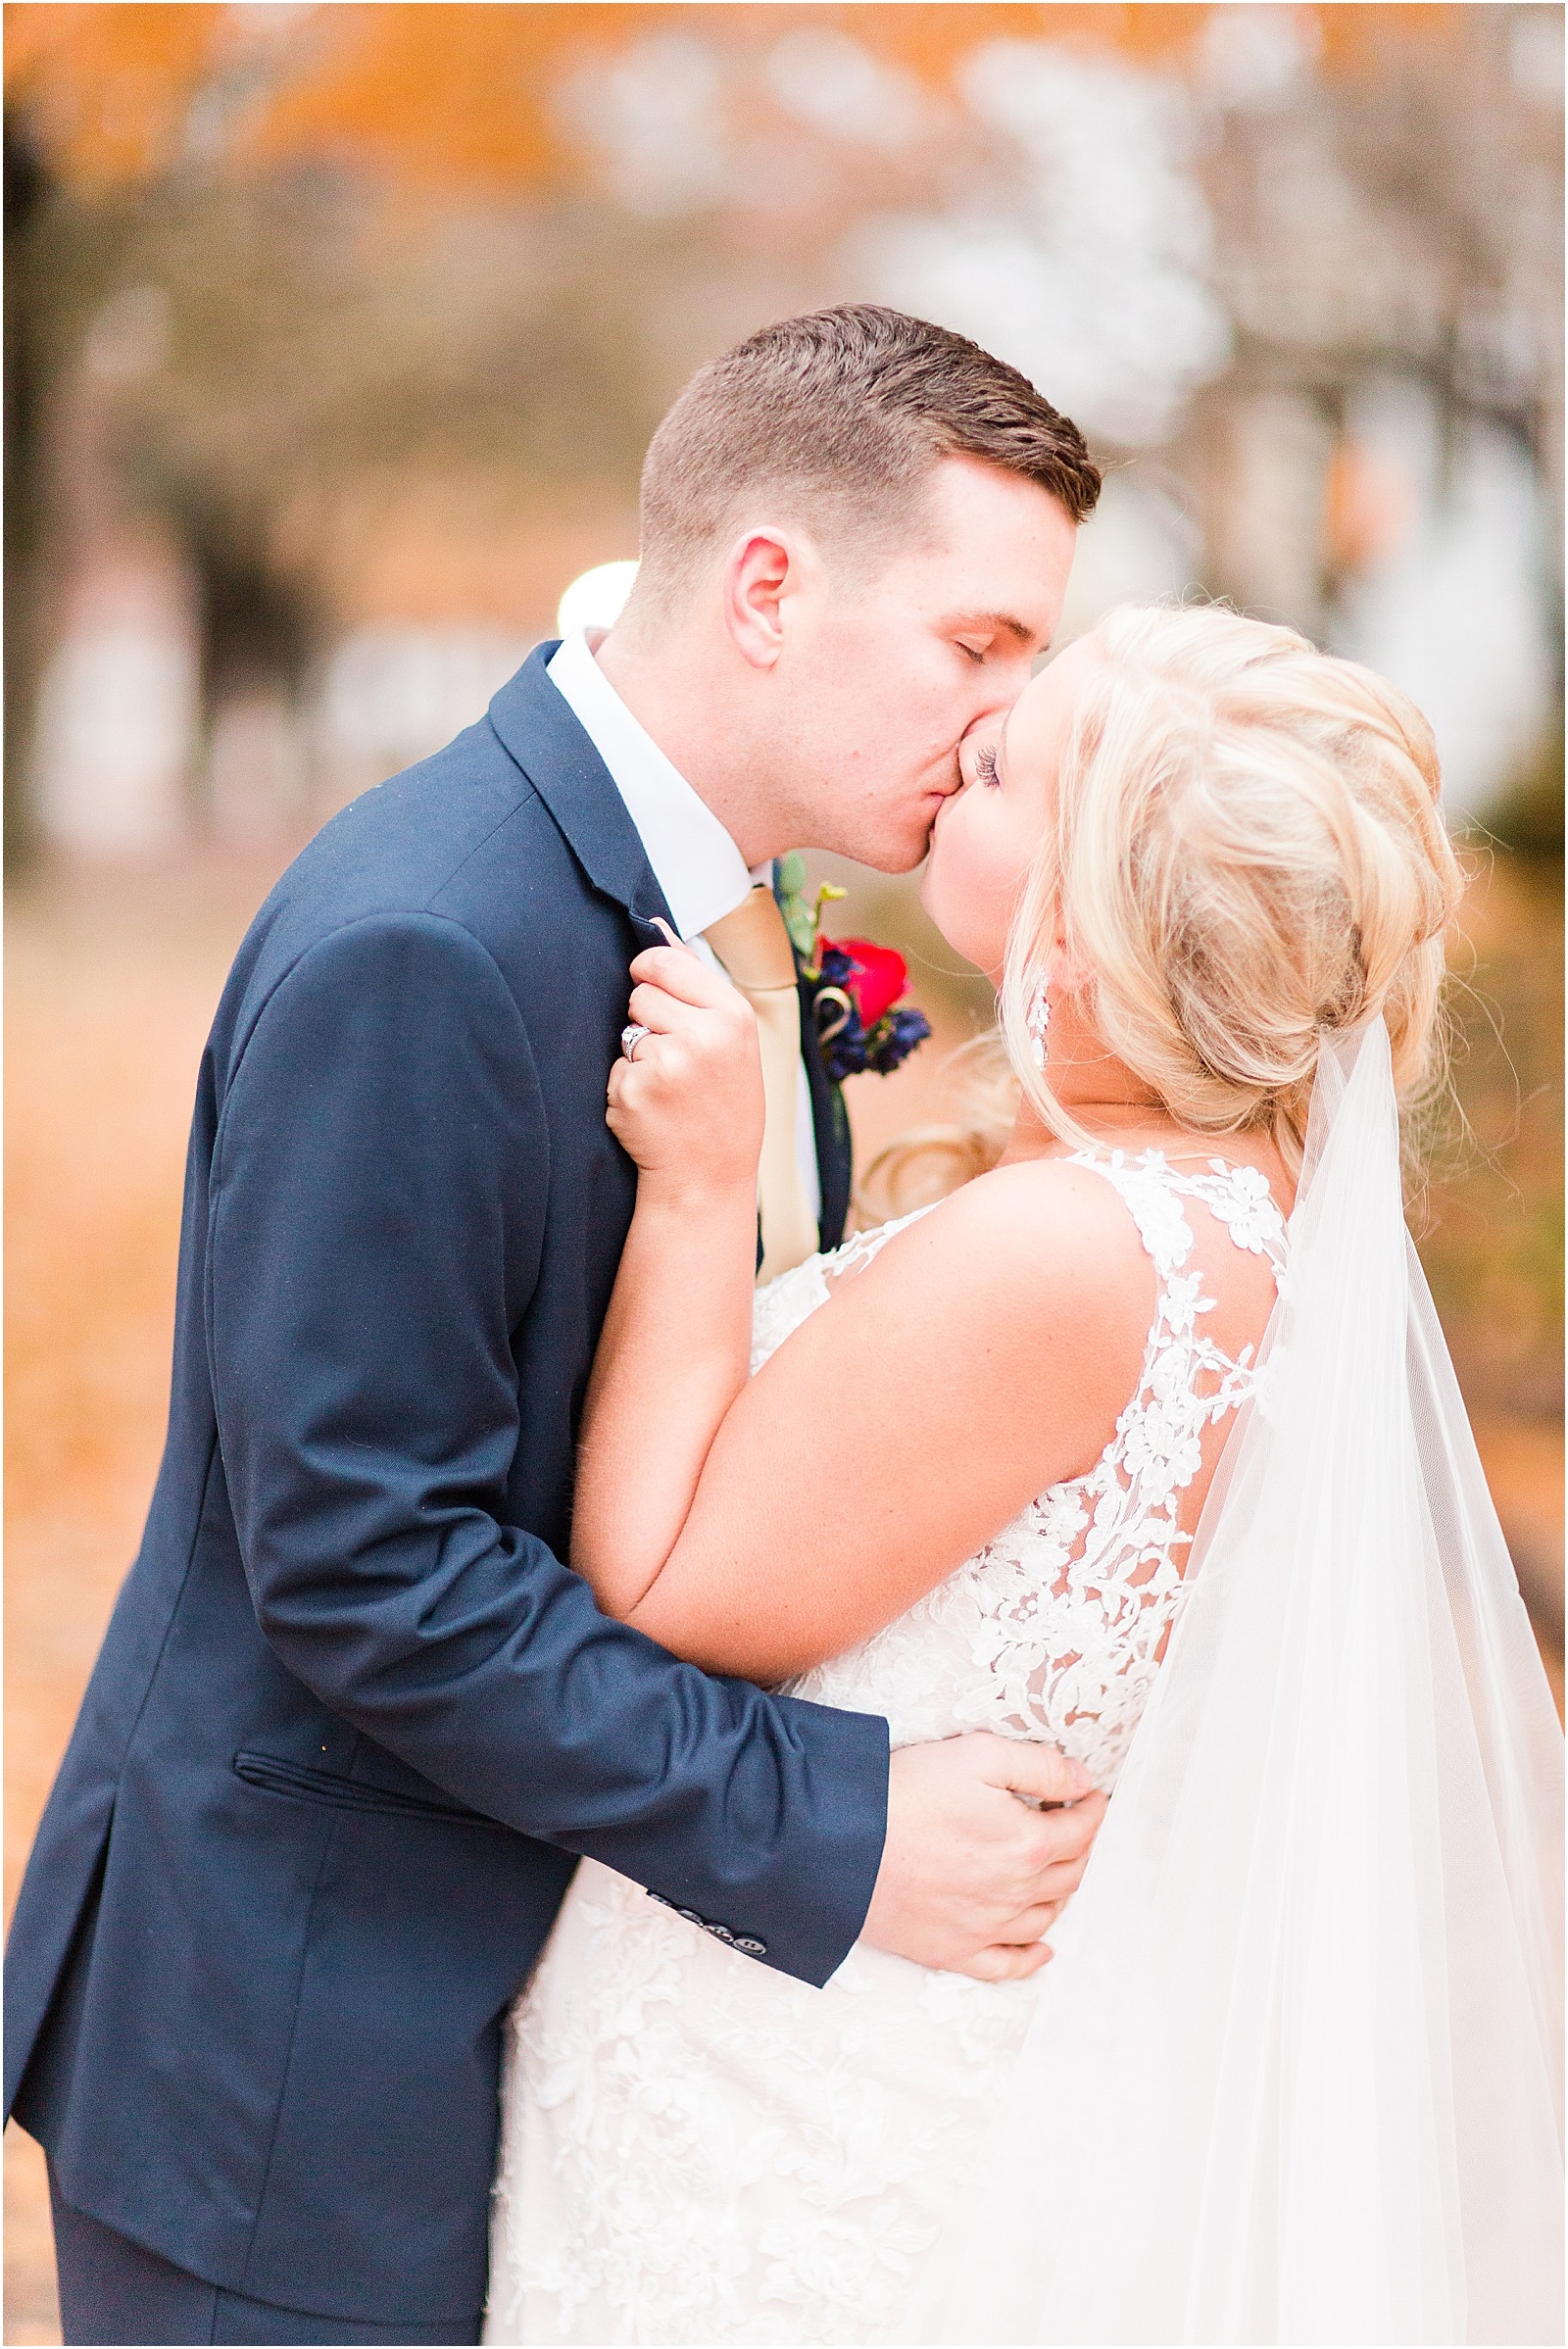 Haylee and Dillon's Evansville, Indiana wedding by Bret and Brandie Photography.0082.jpg